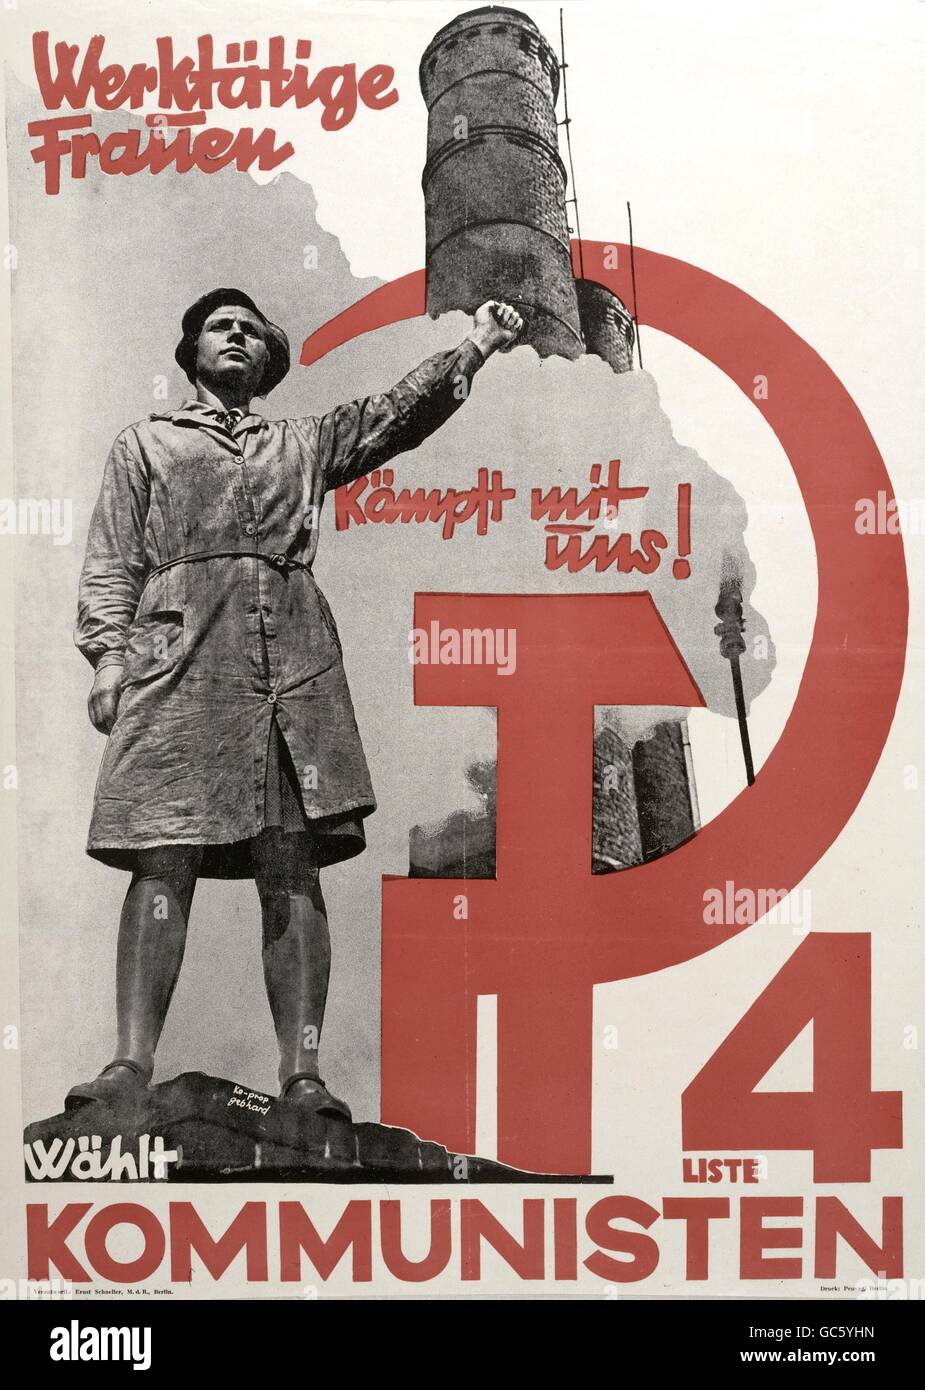 geography / travel, Germany, politics, political parties, Communist Party of Germany (KPD), poster, 'Werktaetige Frauen kaempft mit uns', draft by Max Gebhart (1906 - 1990), Berlin, circa 1930, Additional-Rights-Clearences-Not Available Stock Photo